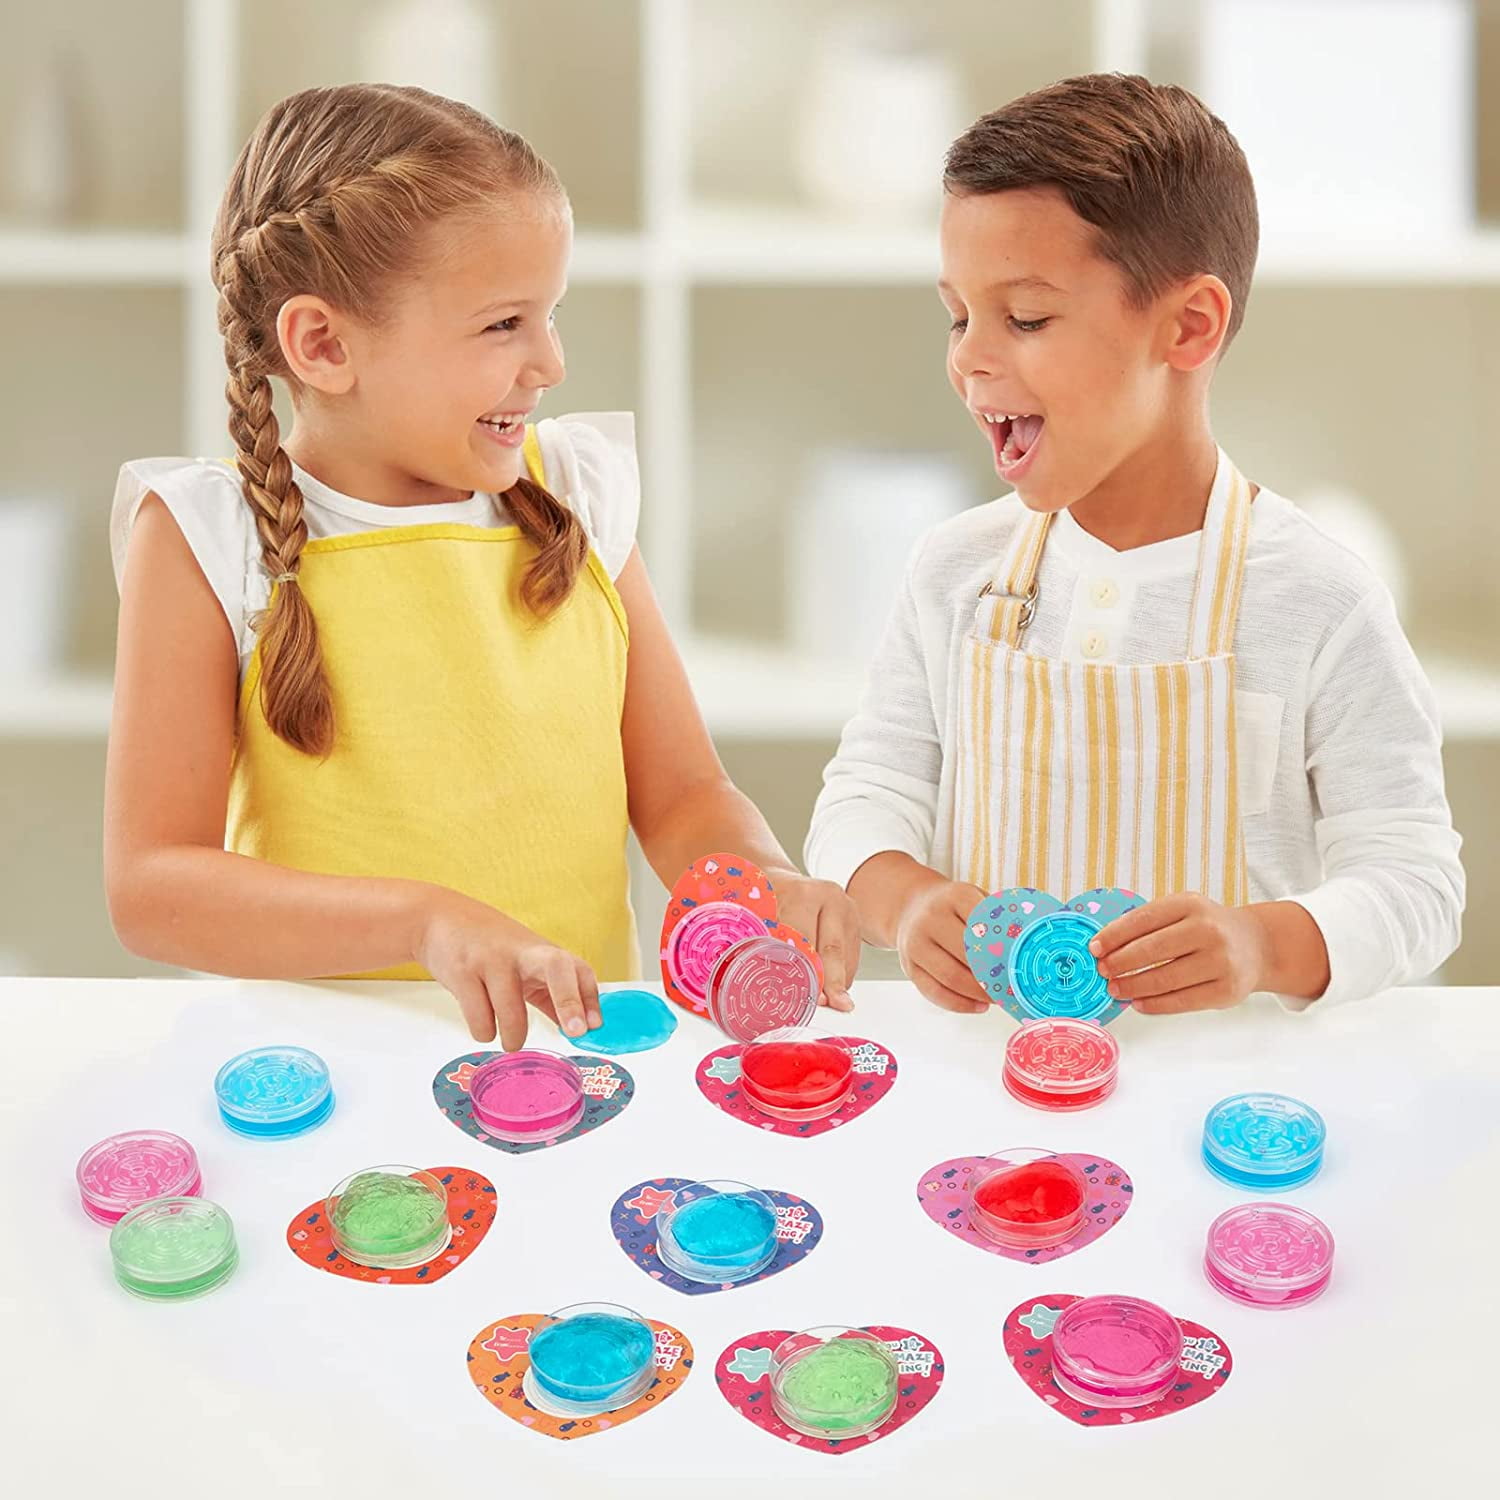 28 Packs Valentine's Day DIY Slime Kit with Heart Boxes, Slime